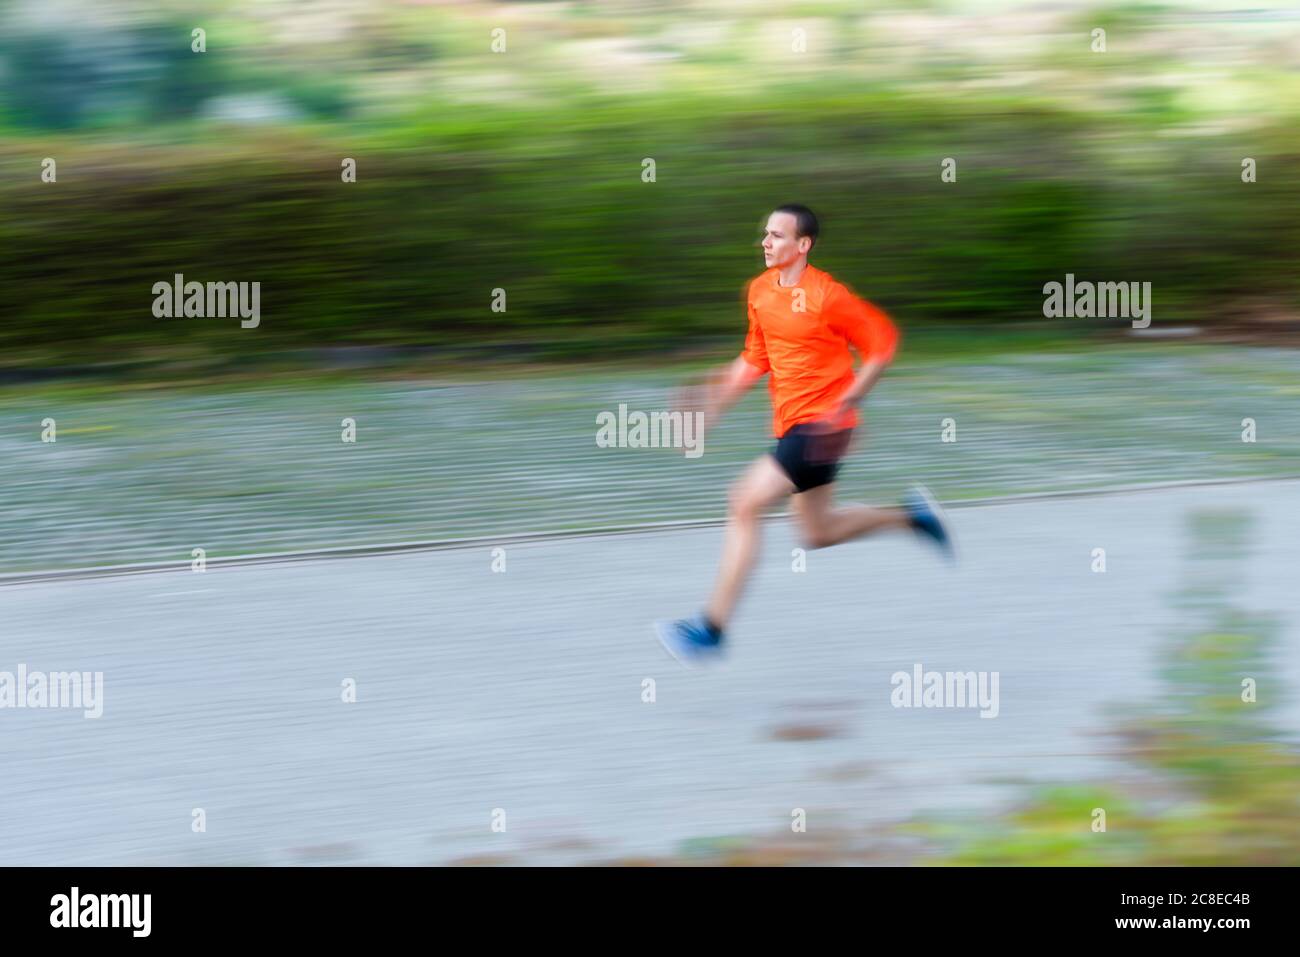 Blurred motion of young man running on footpath Stock Photo